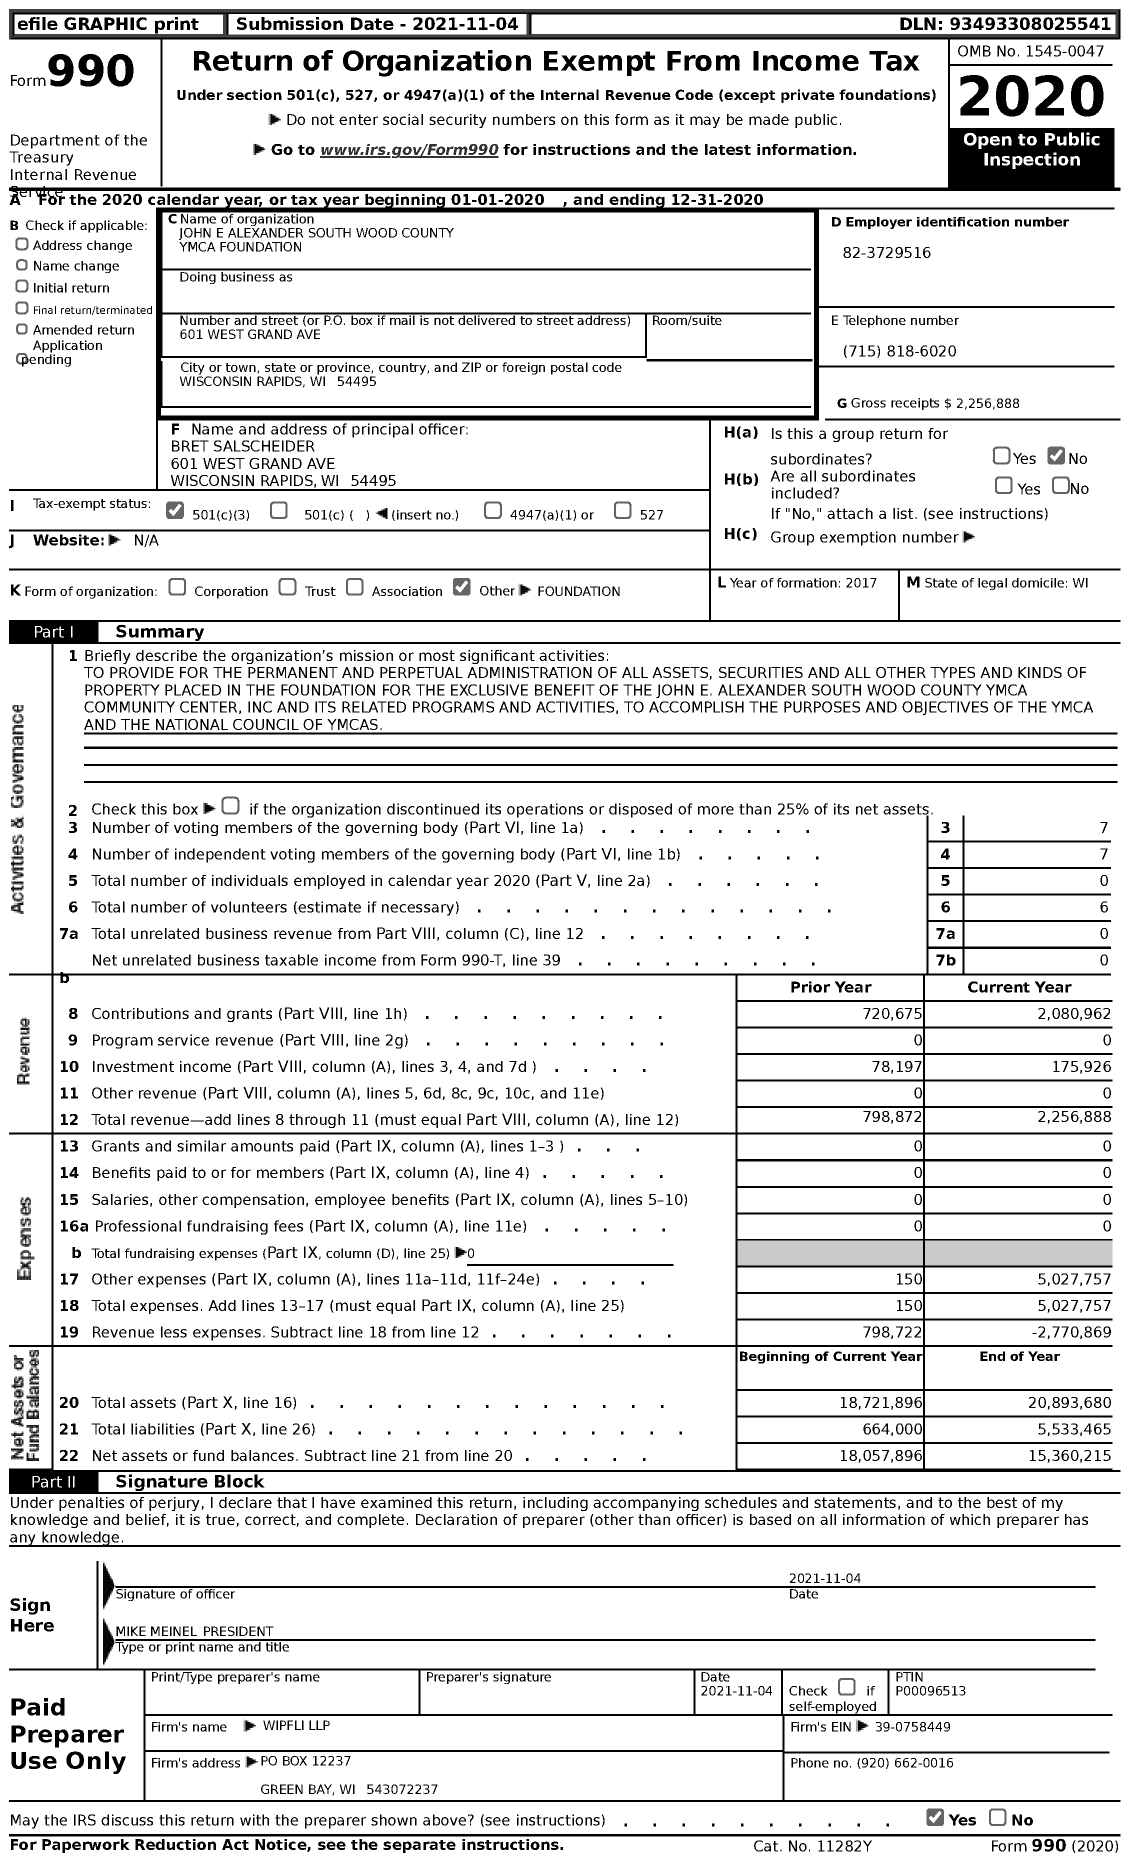 Image of first page of 2020 Form 990 for John E Alexander South Wood County Ymca Foundation